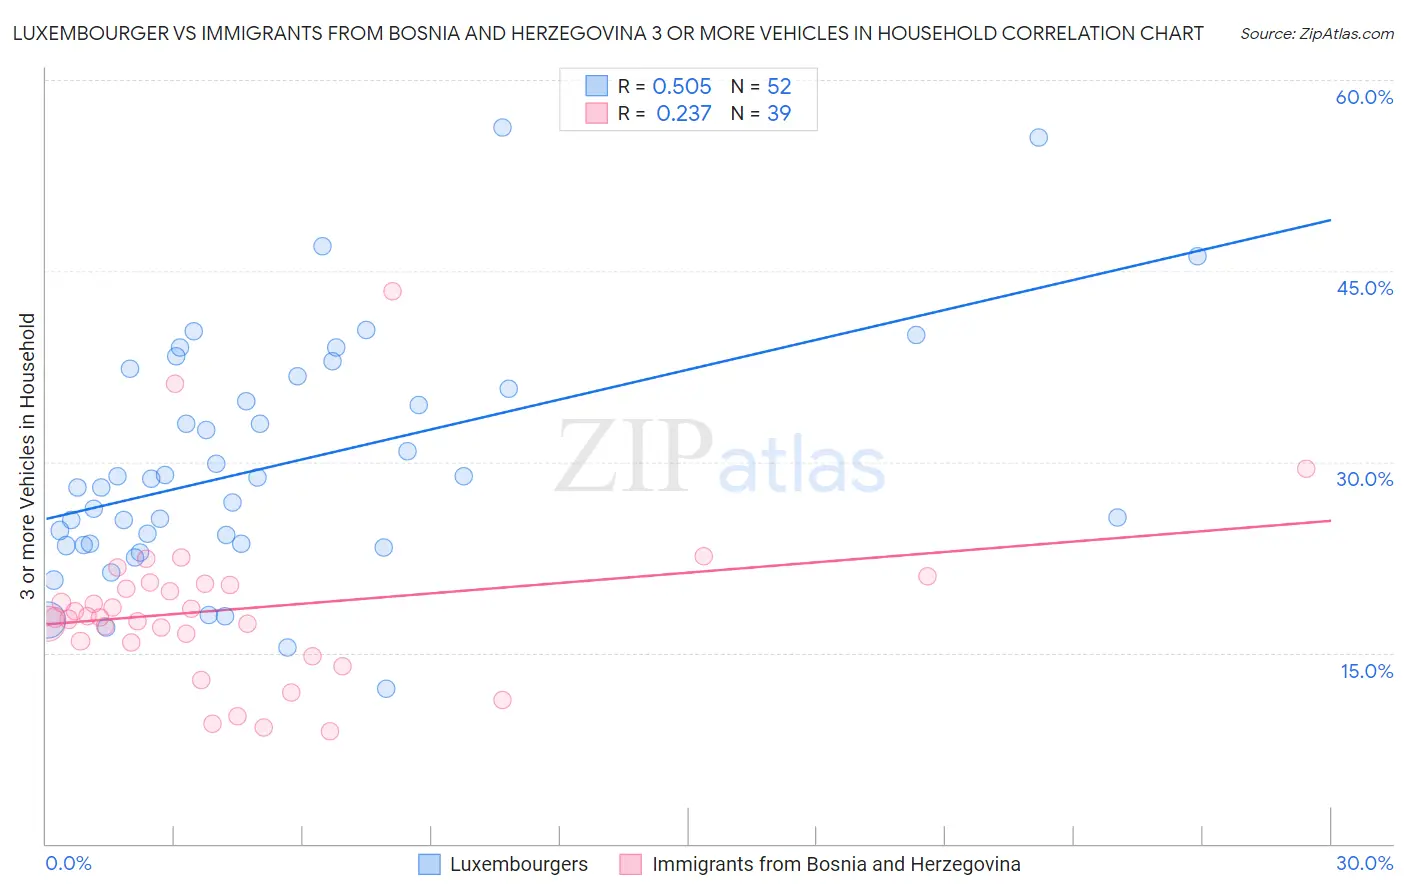 Luxembourger vs Immigrants from Bosnia and Herzegovina 3 or more Vehicles in Household